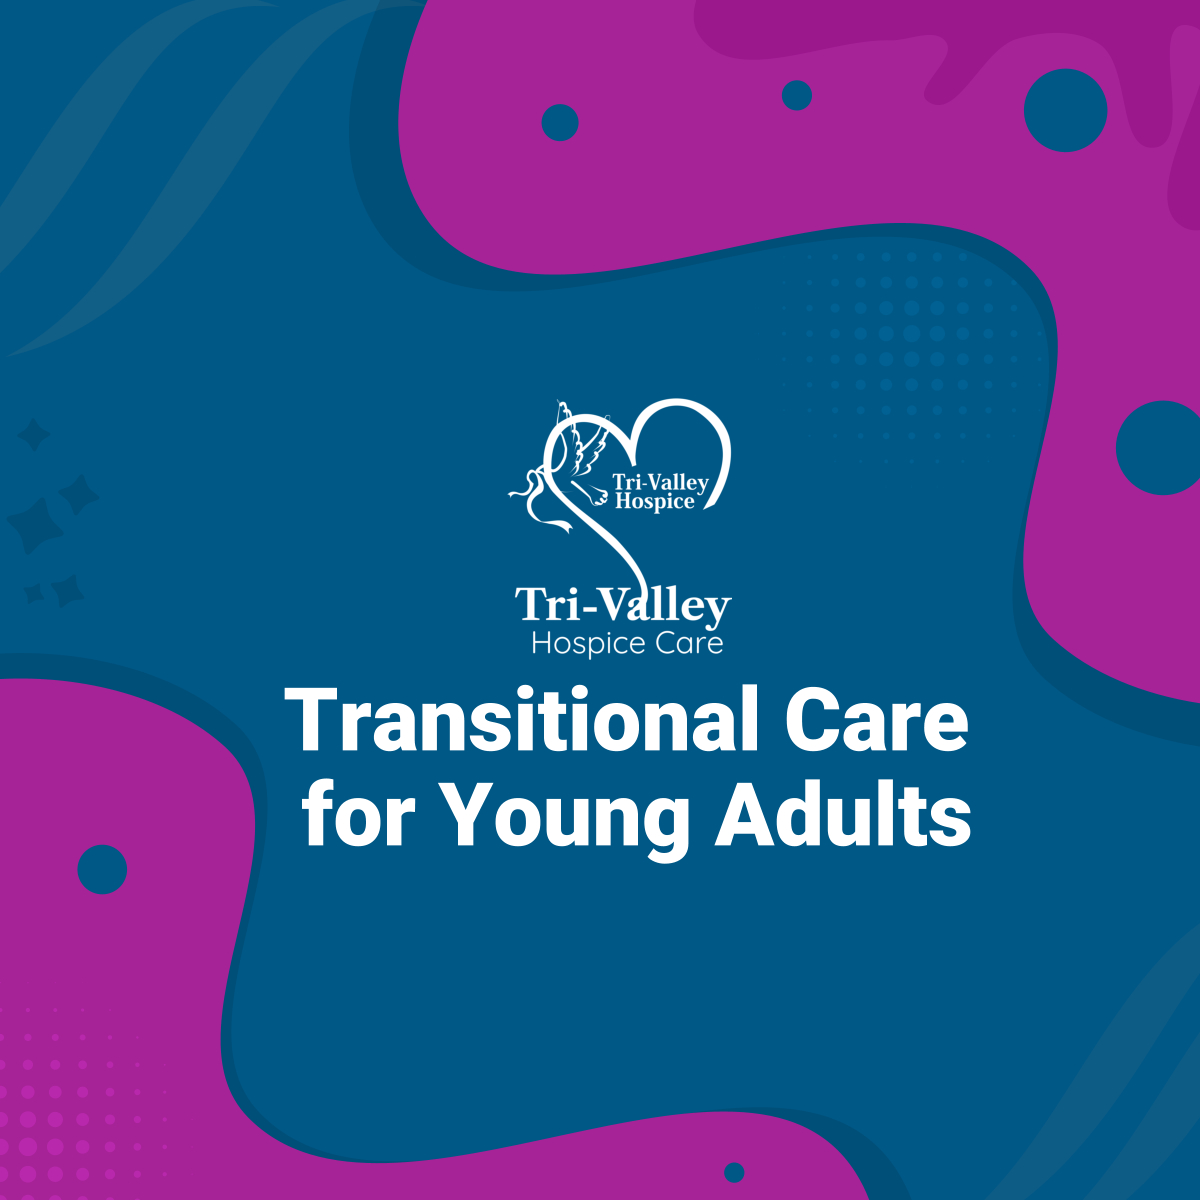 Transitional hospice care takes on profound significance. Addressing the unique needs of young adults facing terminal illness provides a bridge between medical care and the pursuit of a meaningful life.

#ChatsworthCA #HospiceCare #TransitionalCare